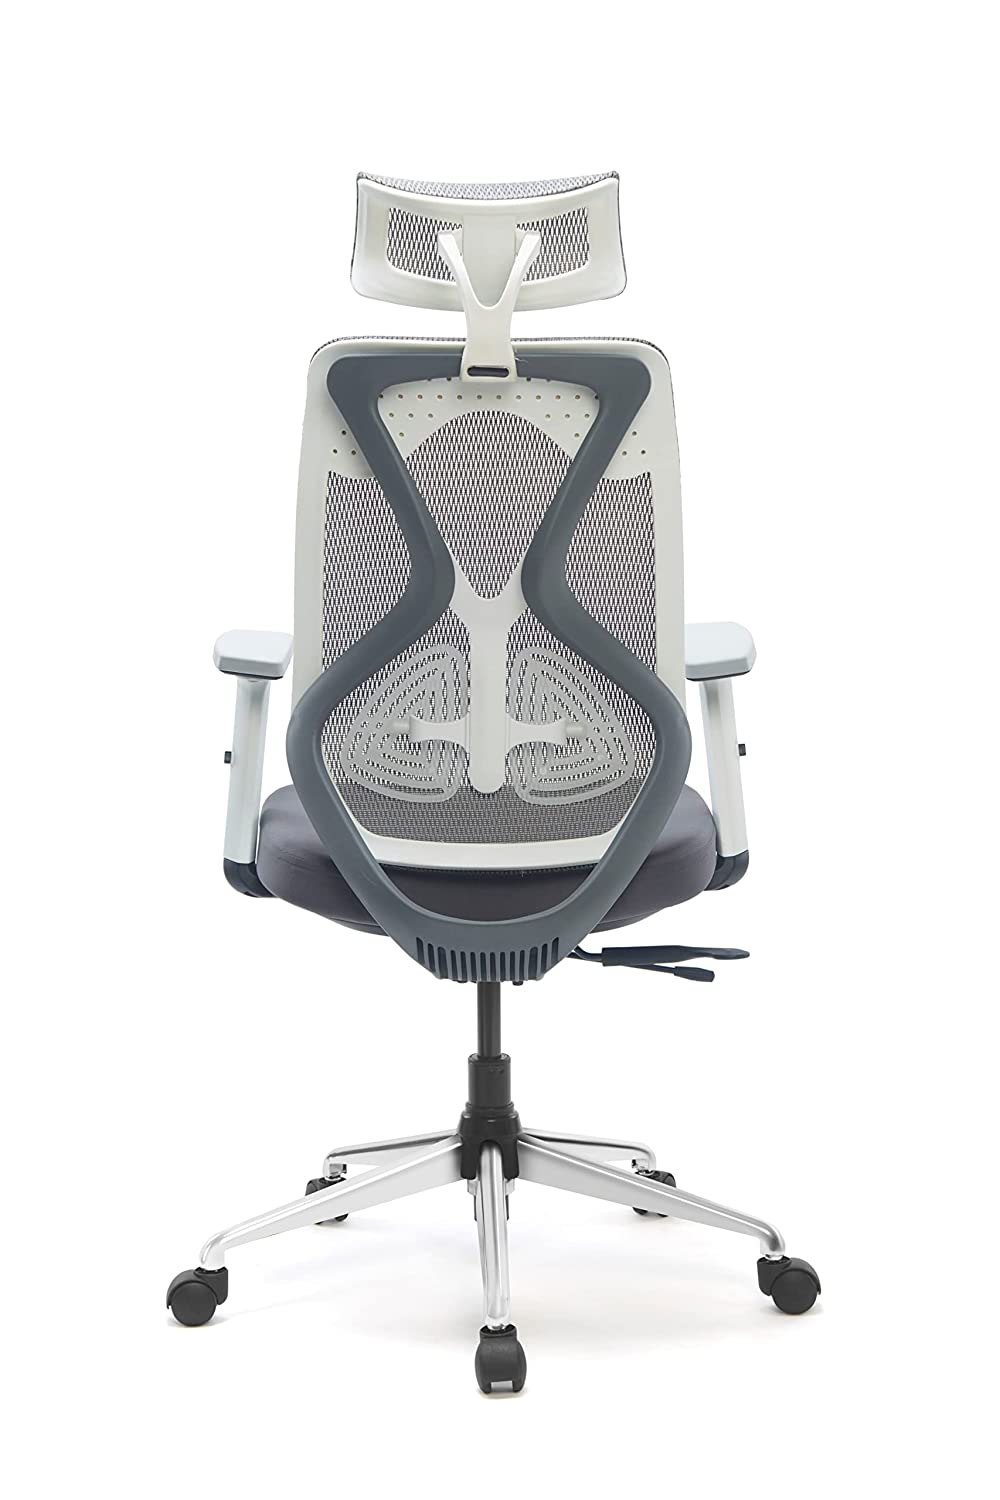 JD9 Oyster 1 Seater Chair with Cushion Seat (Breathable Mesh, White & Grey)